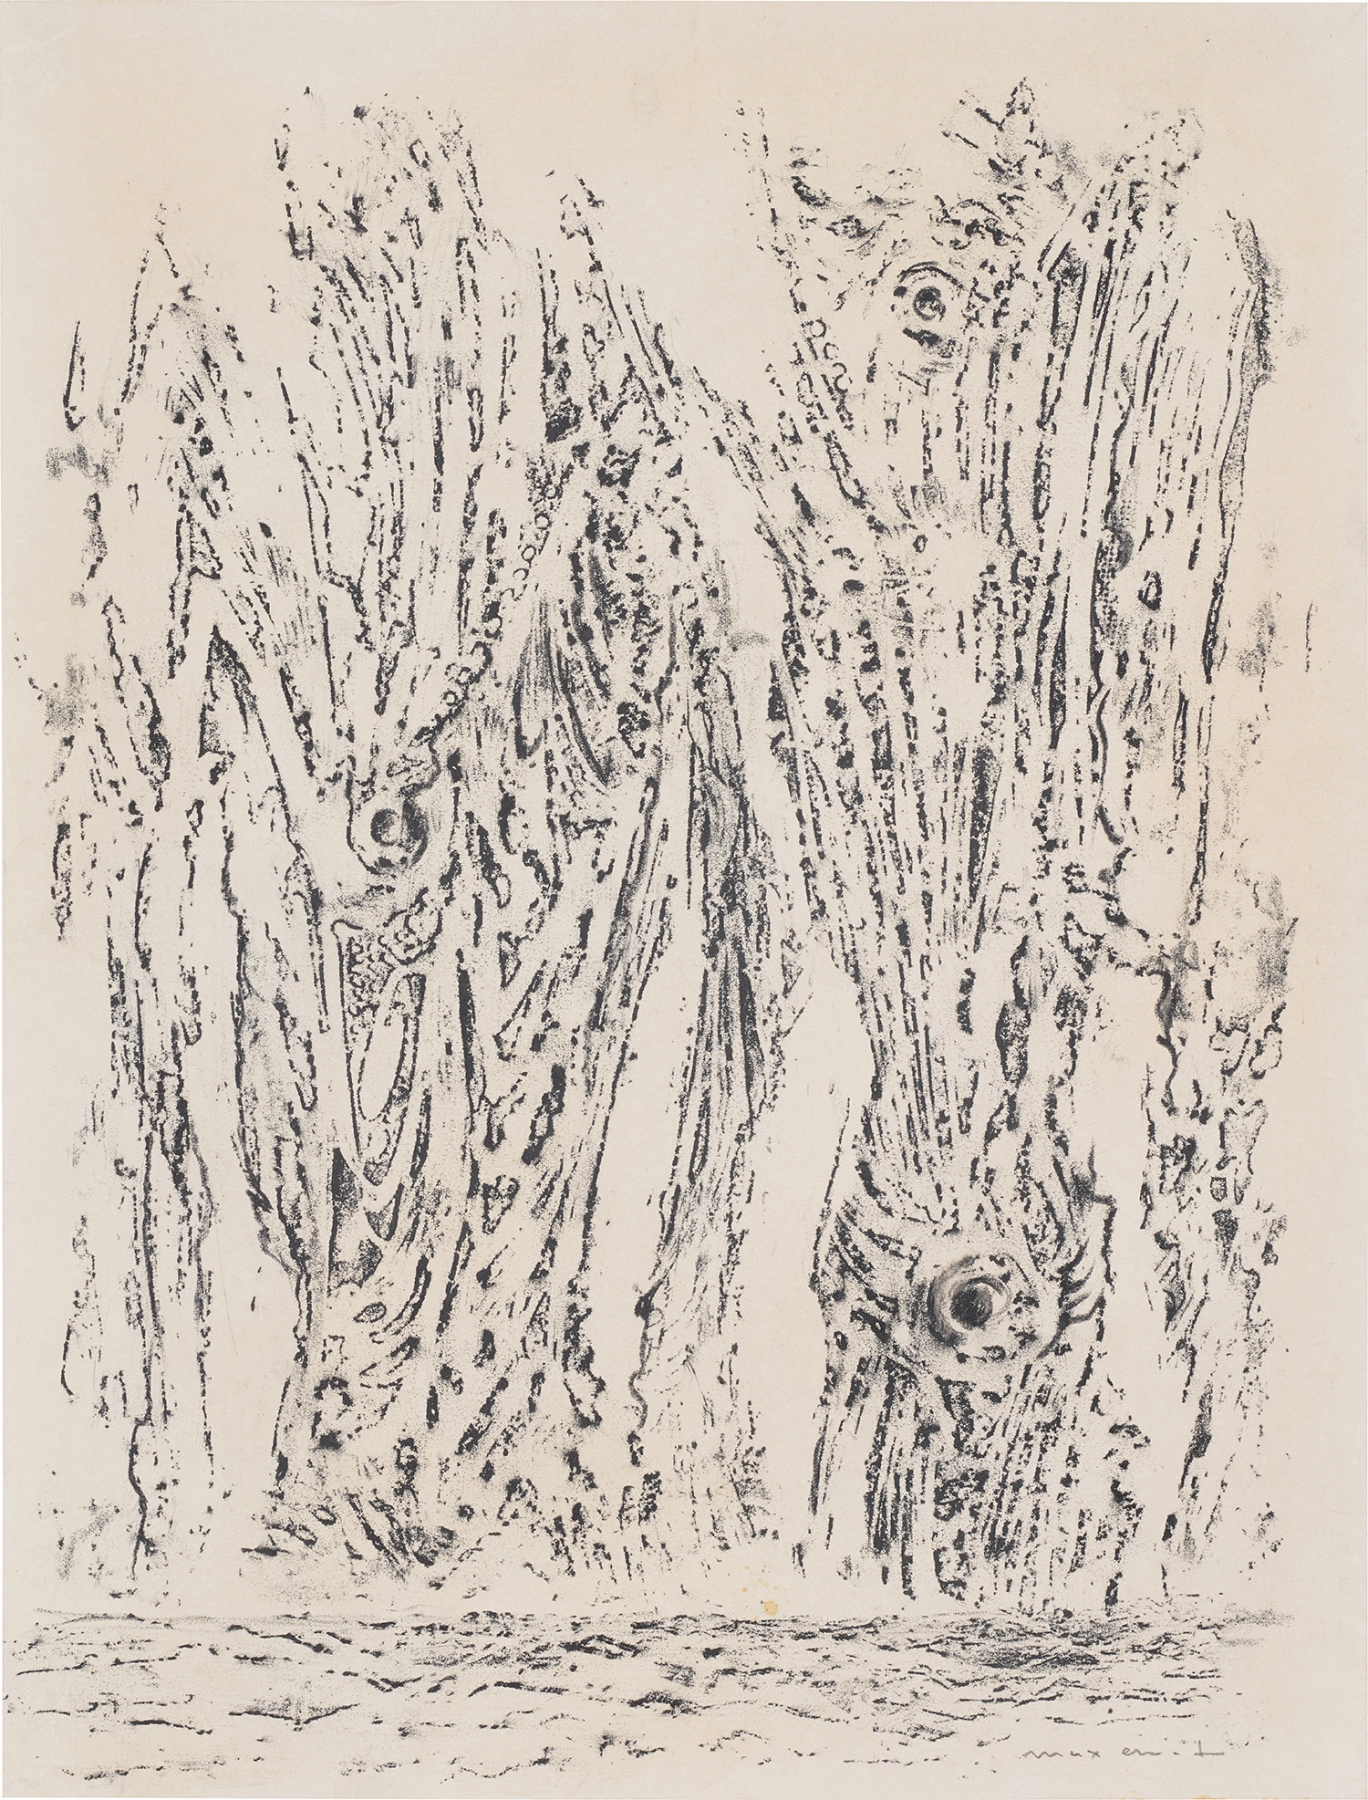 Max Ernst

For&amp;ecirc;t, 1964

frottage on paper

paper: 16 1/4 x 12 3/8 inches

frame: 24 5/8 x 21 5/8 x 1 9/16 inches